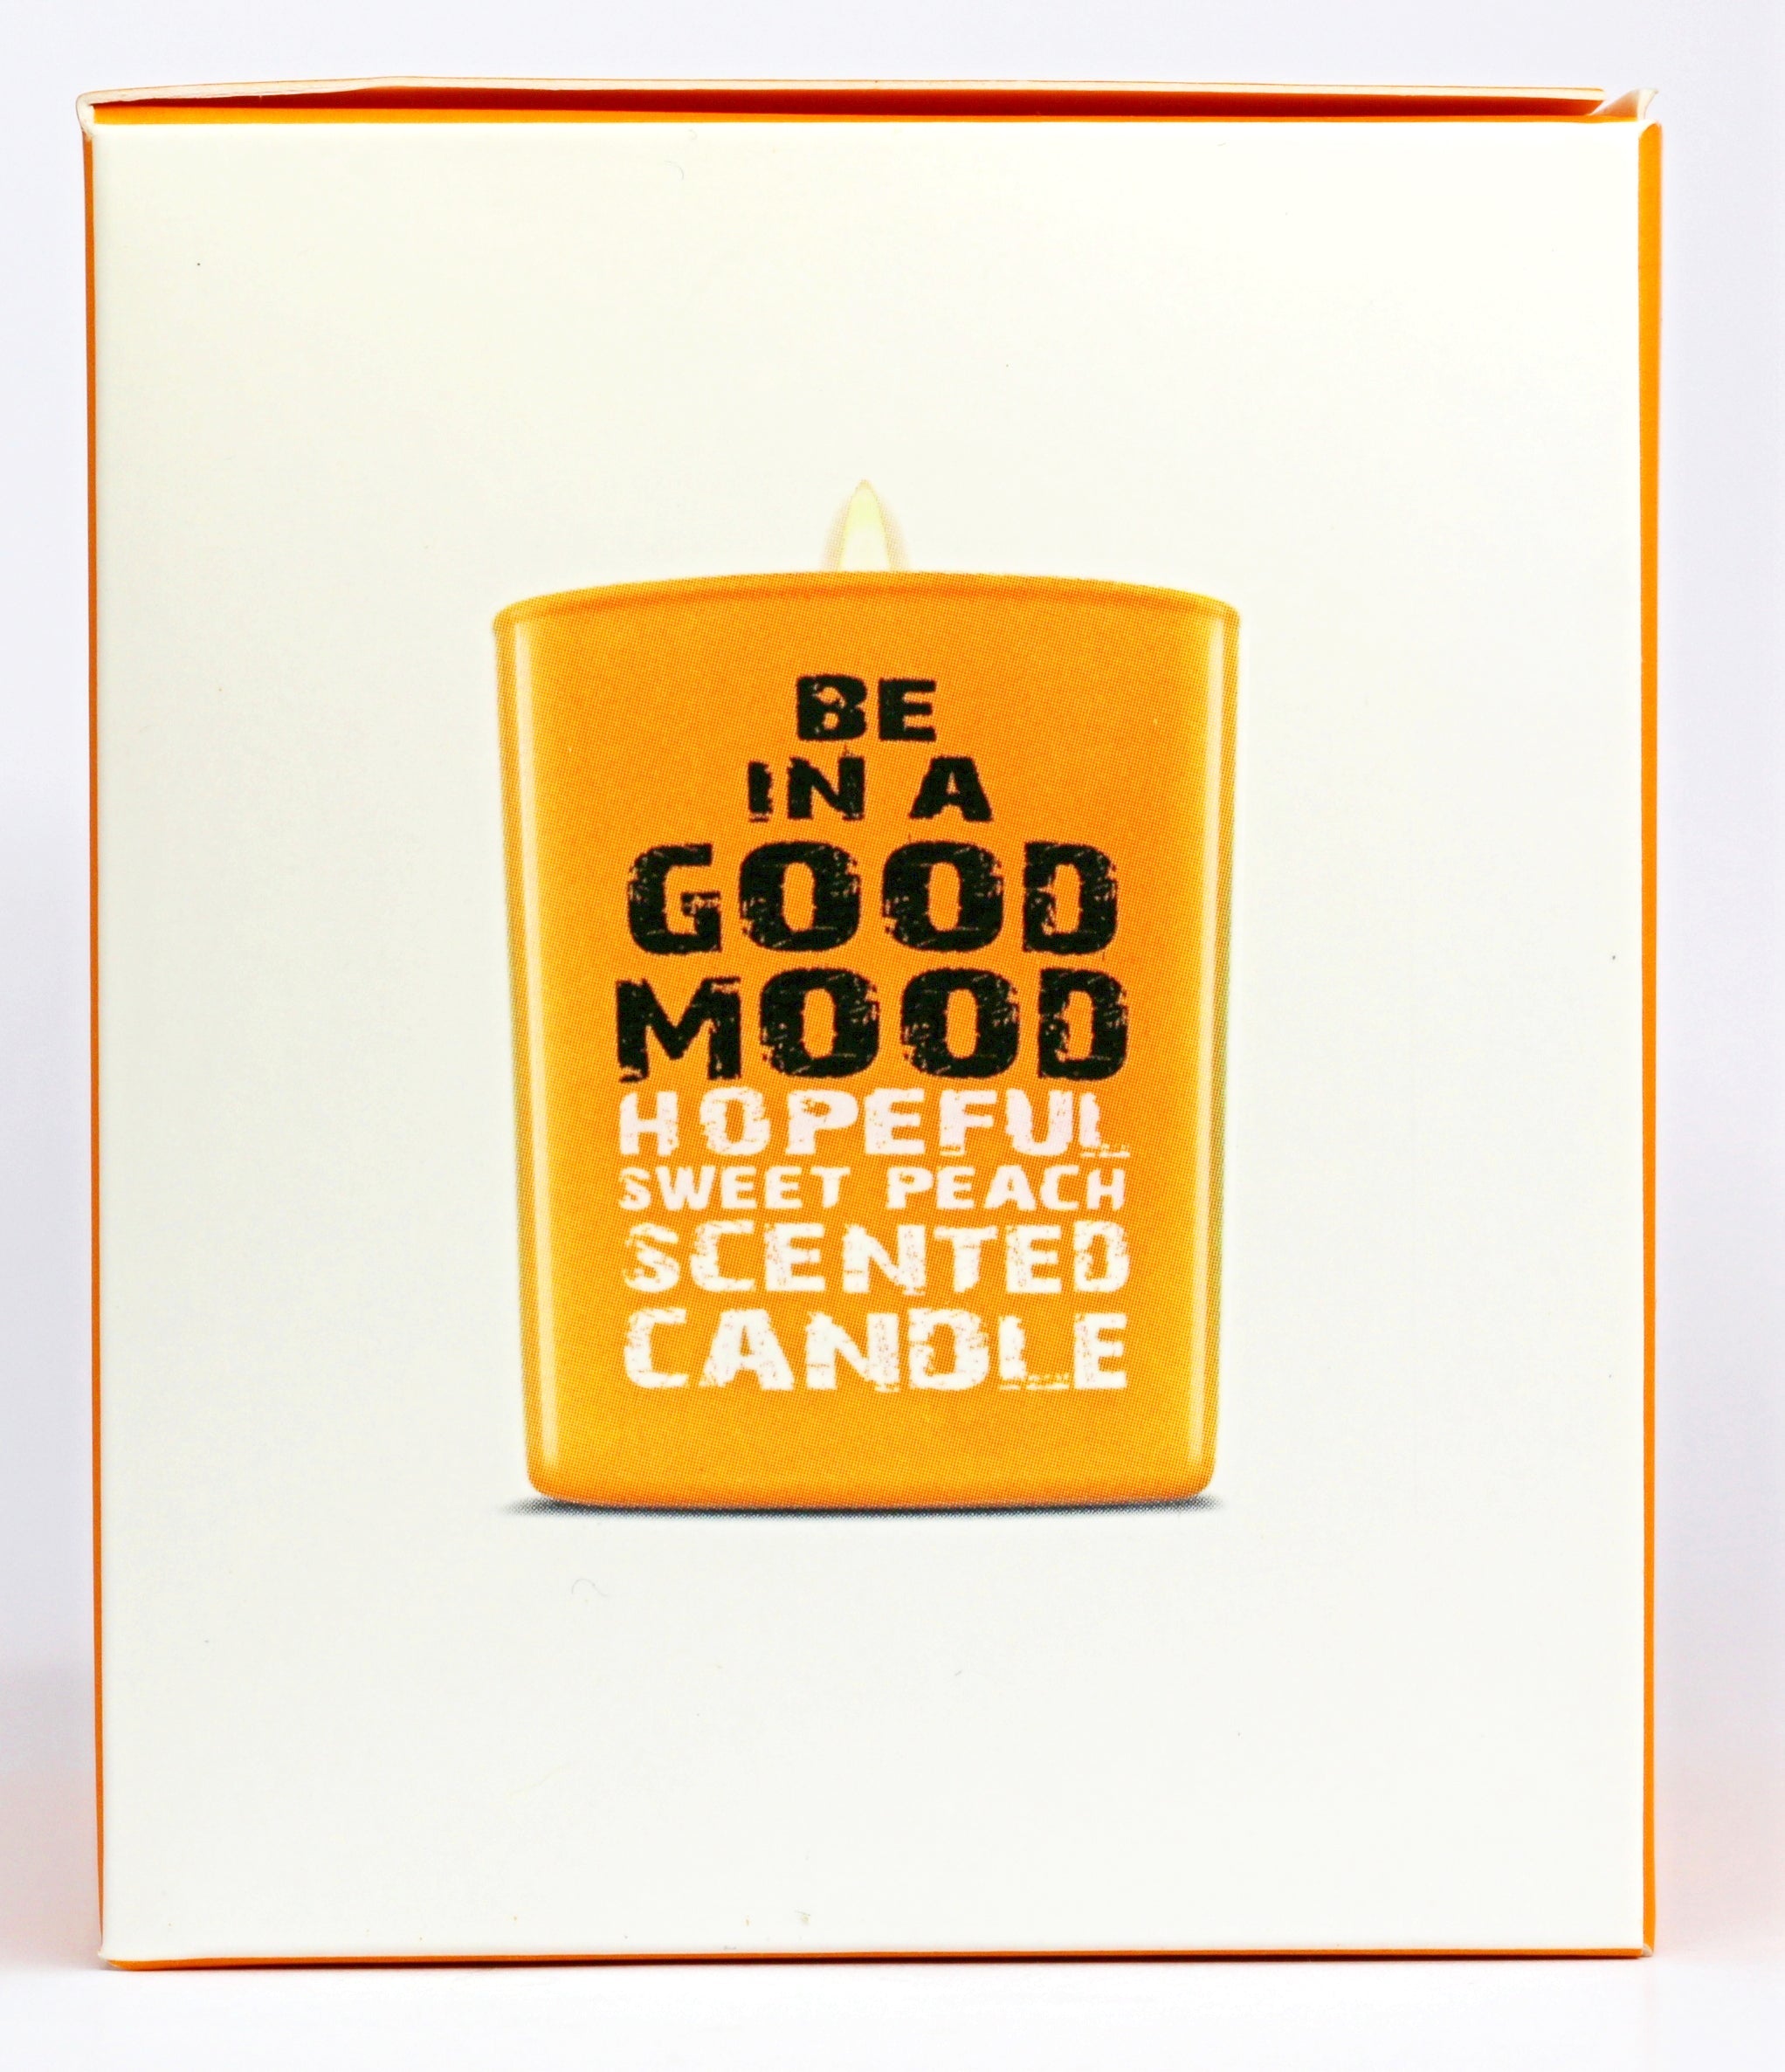 Be in a Good Mood Hopeful Sweet Peach Scented Candle